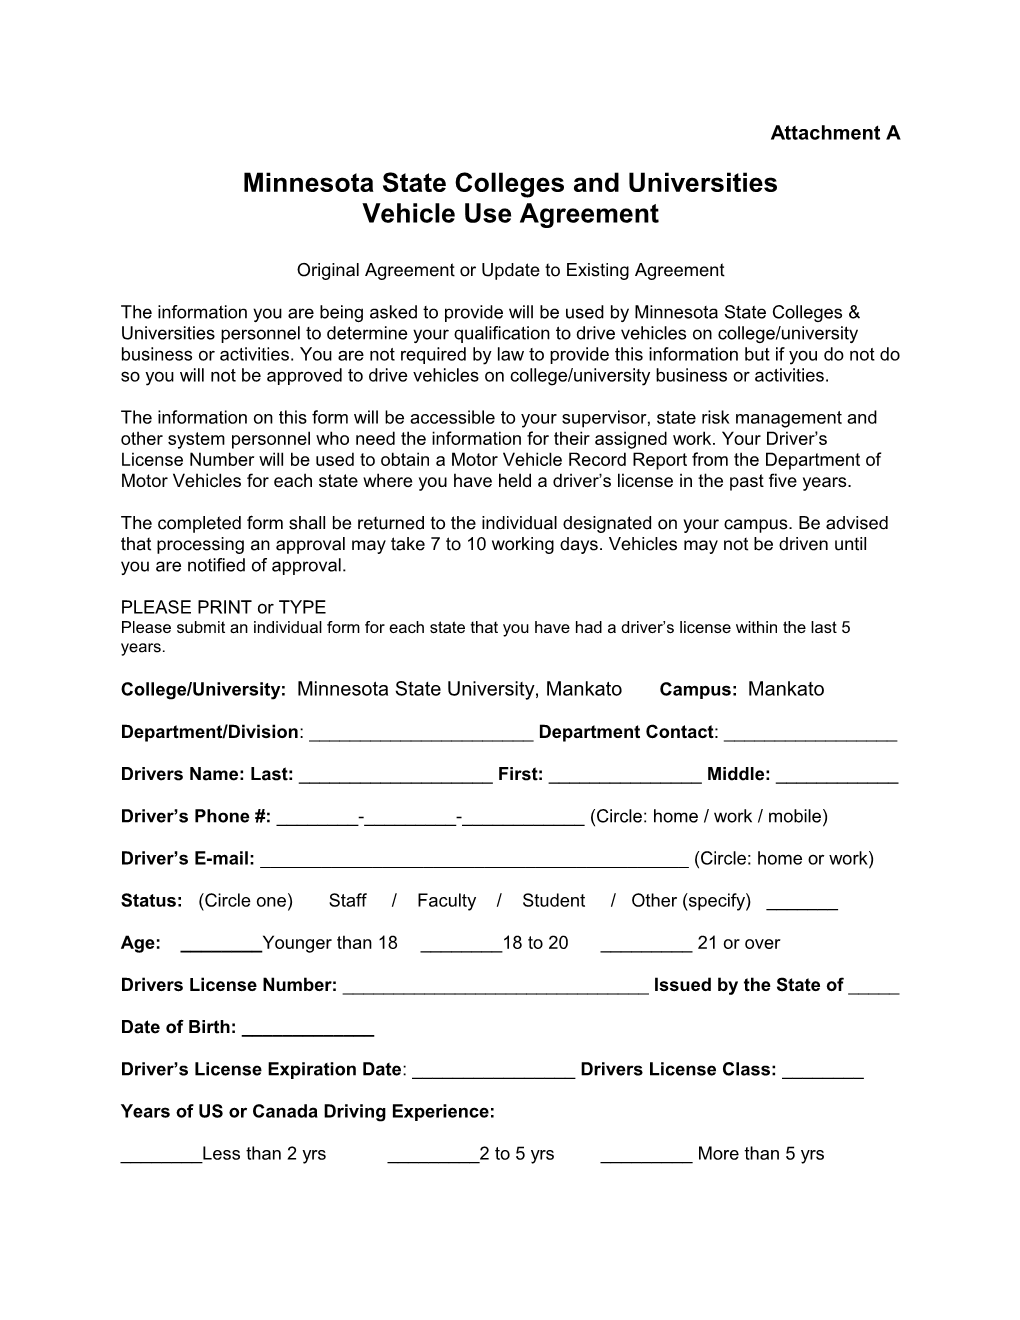 Minnesota State Colleges and Universities s4